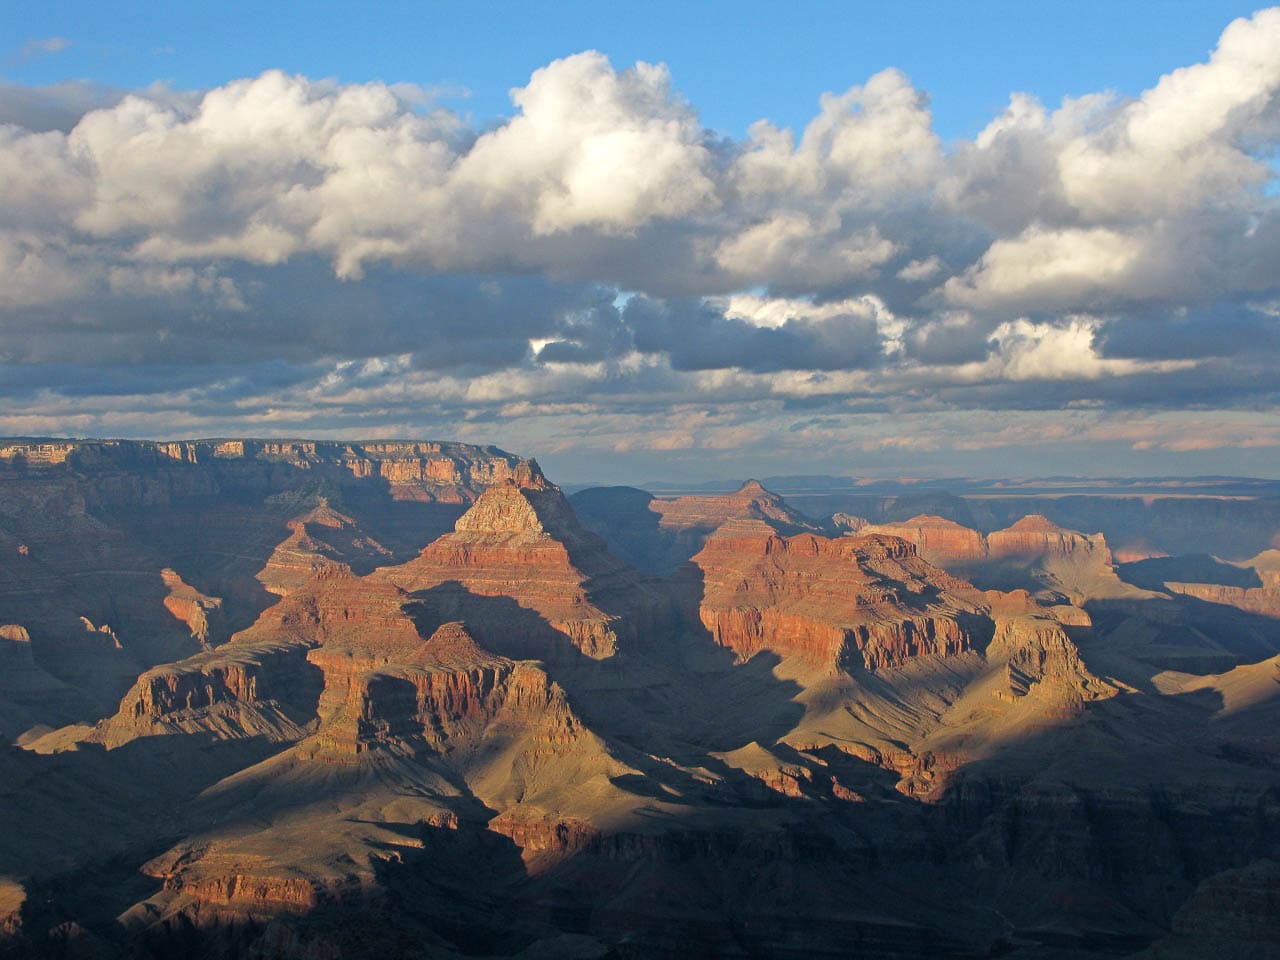 Grandview Point landscape on Desert View Drive in Grand Canyon National Park - Image credit NPS Michael Quinn